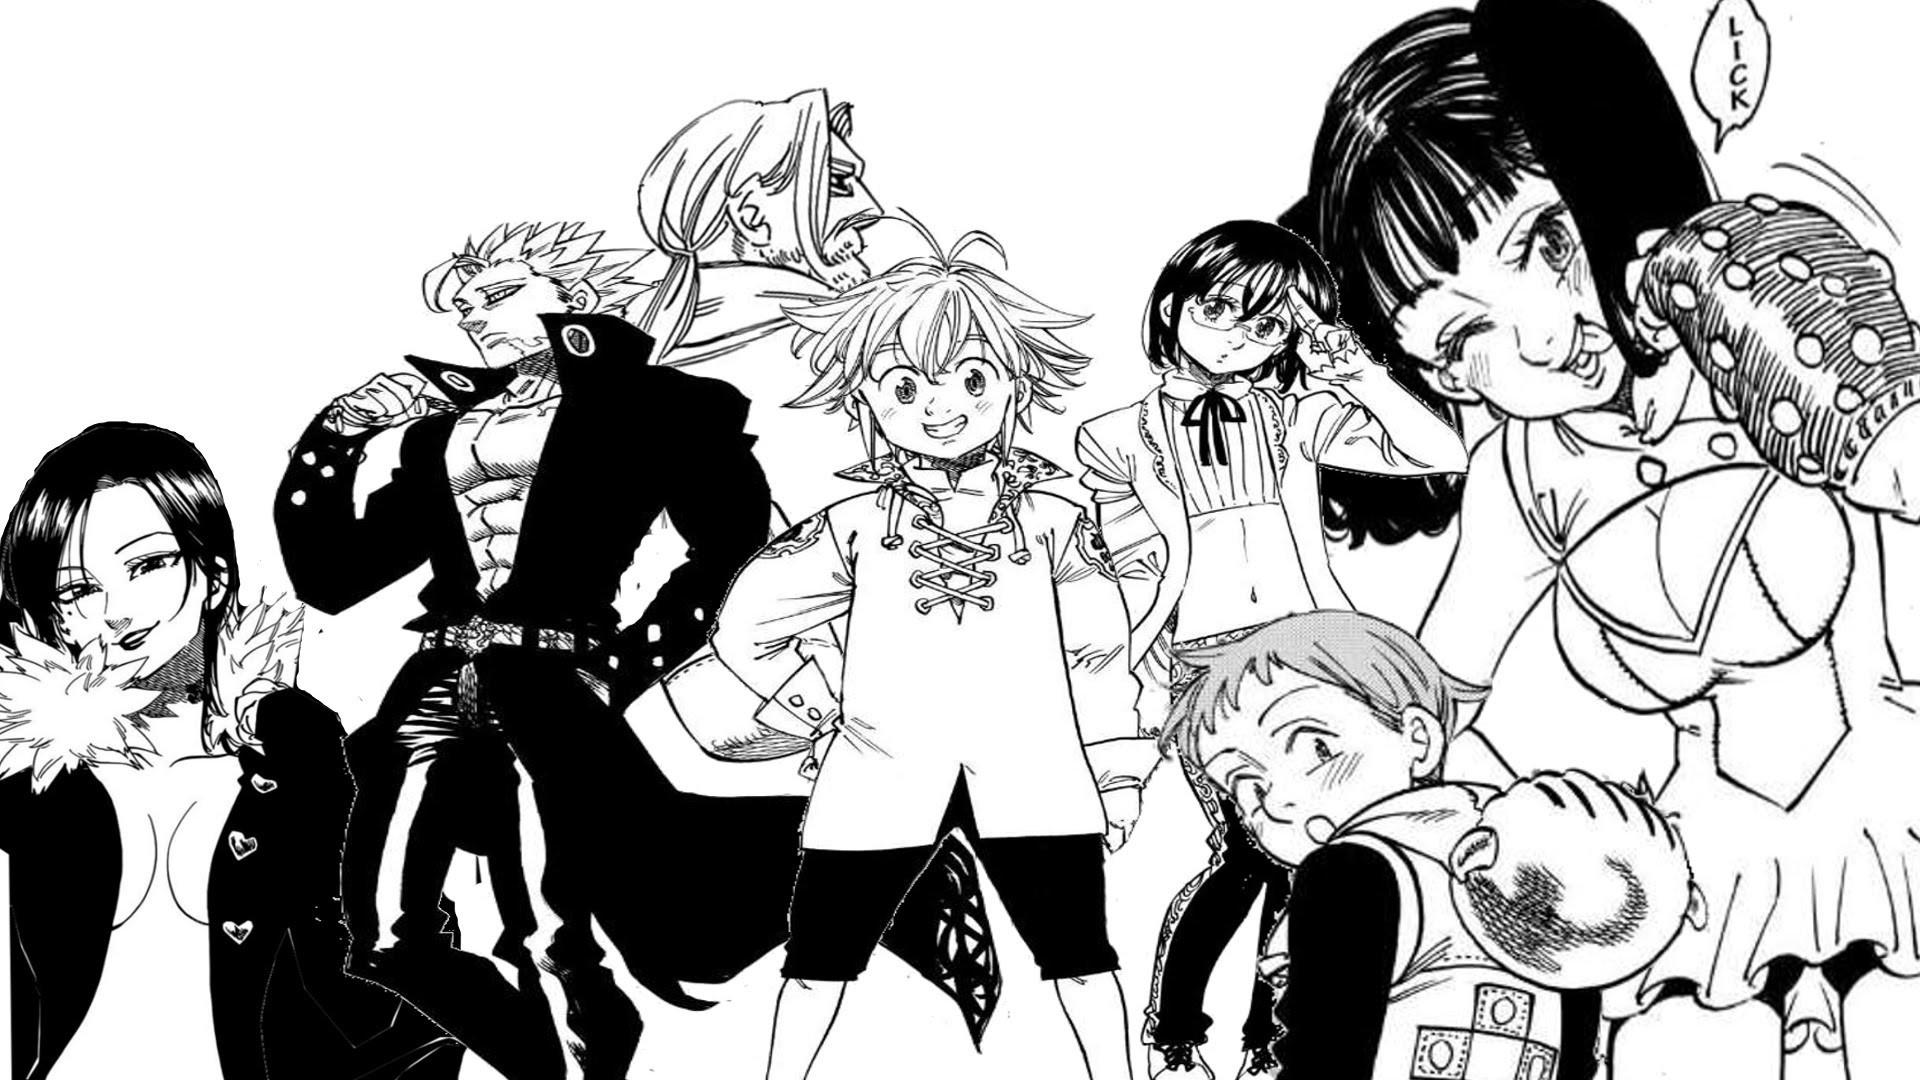 1920x1080 From left to right: Merlin, Ban, Escanor, Meliodas, Gowther, King